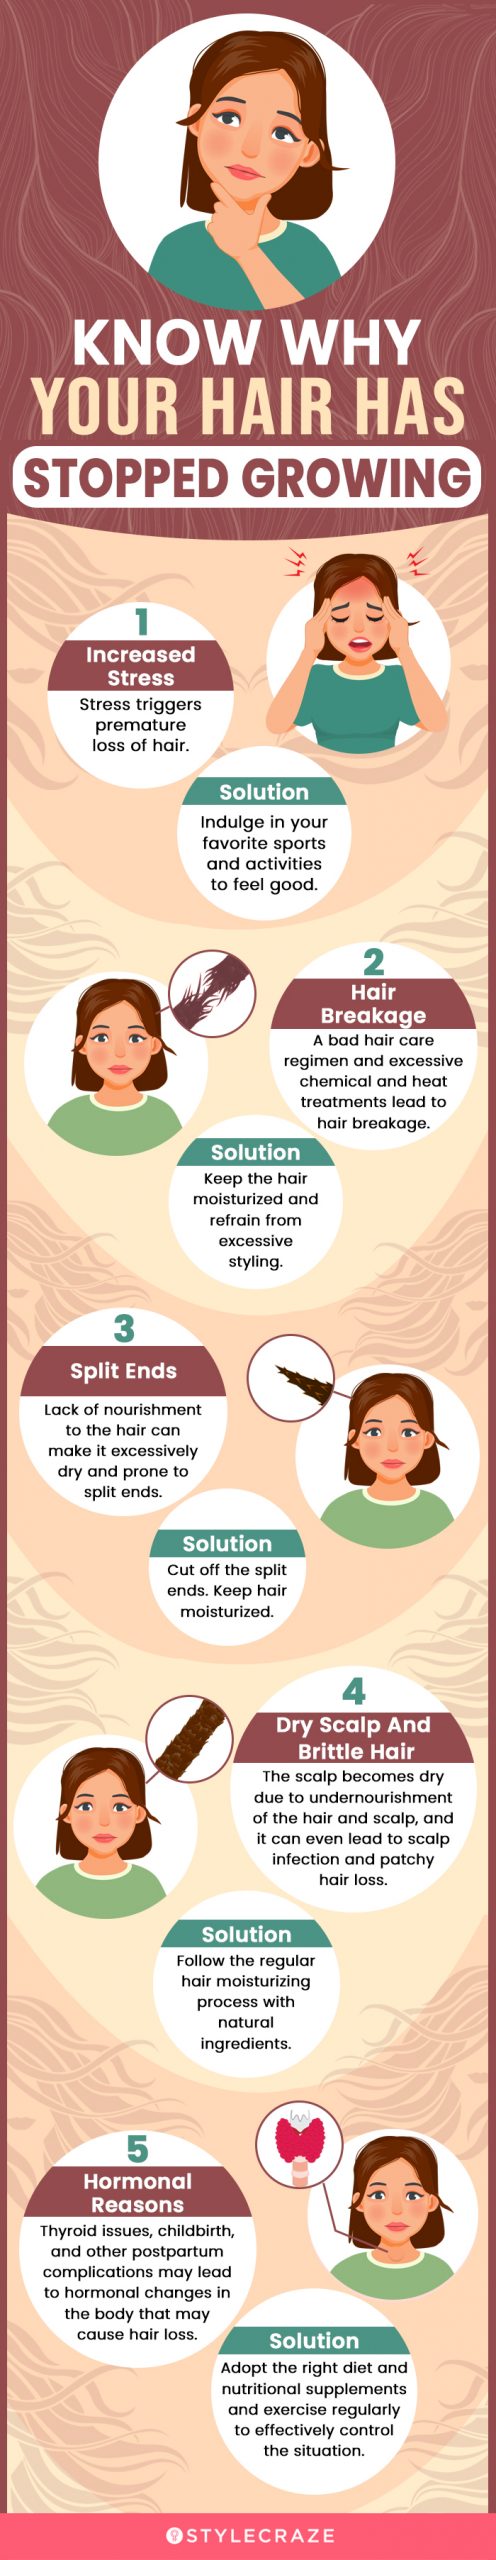 know why your hair has stopped growing (infographic)